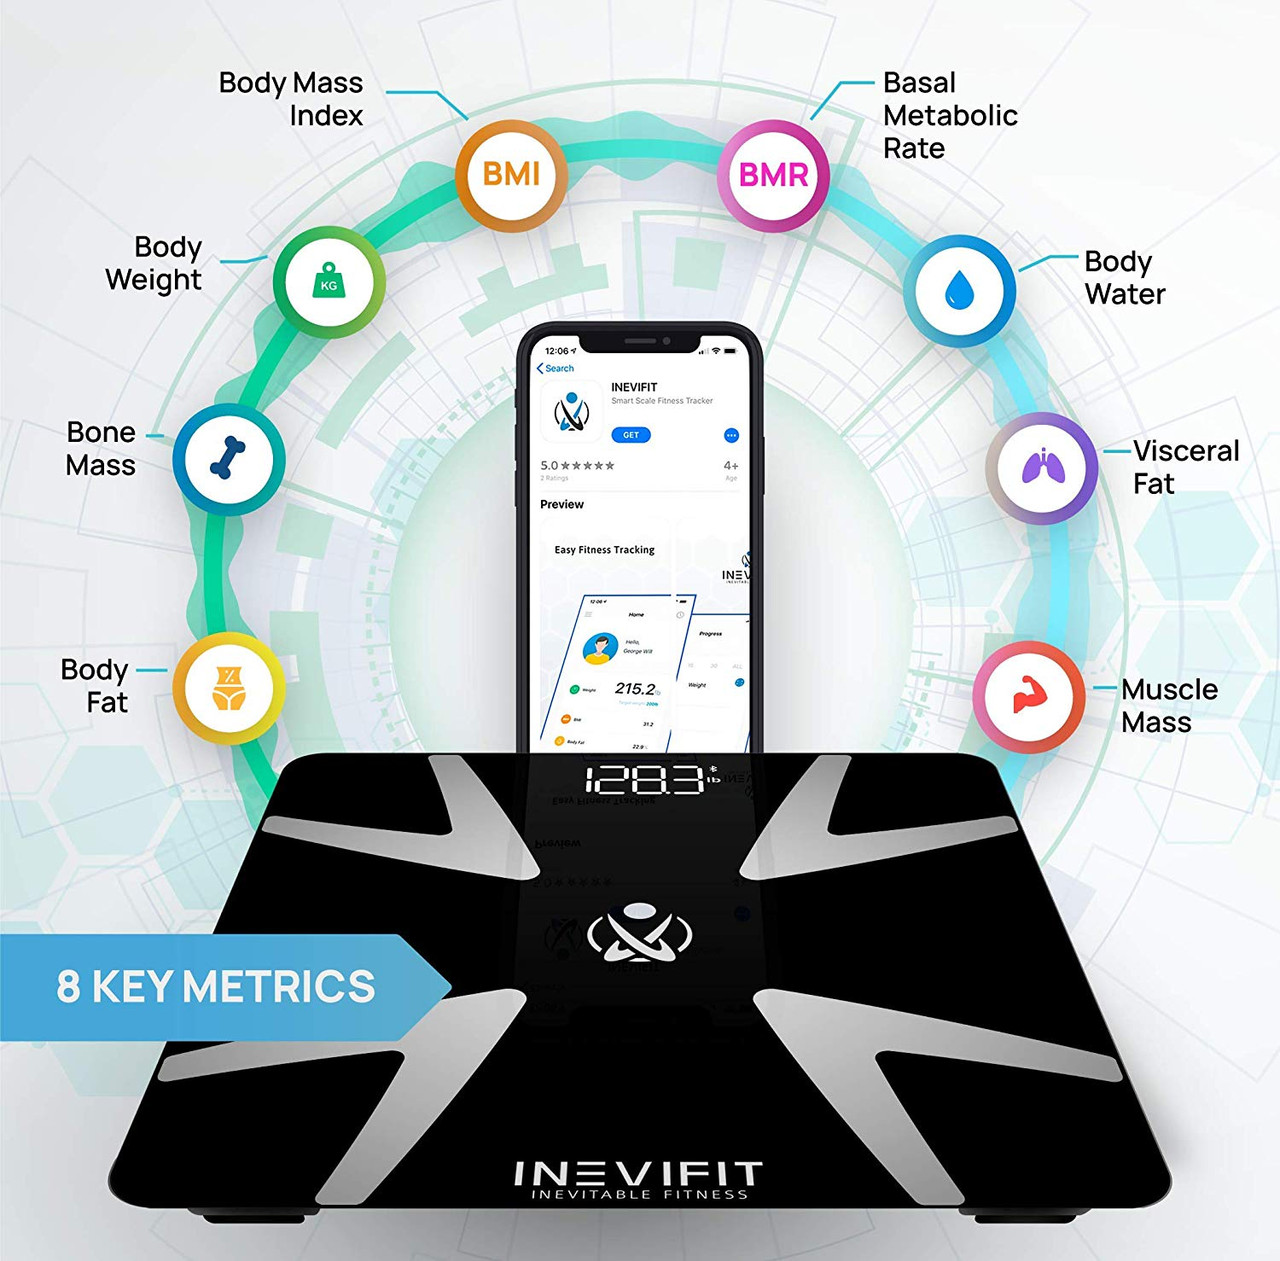 INEVIFIT BODY-ANALYZER SCALE, Highly Accurate Digital Bathroom Body Composition Analyzer, Measures Weight, Body Fat, Water, Muscle, BMI, Visceral Fat